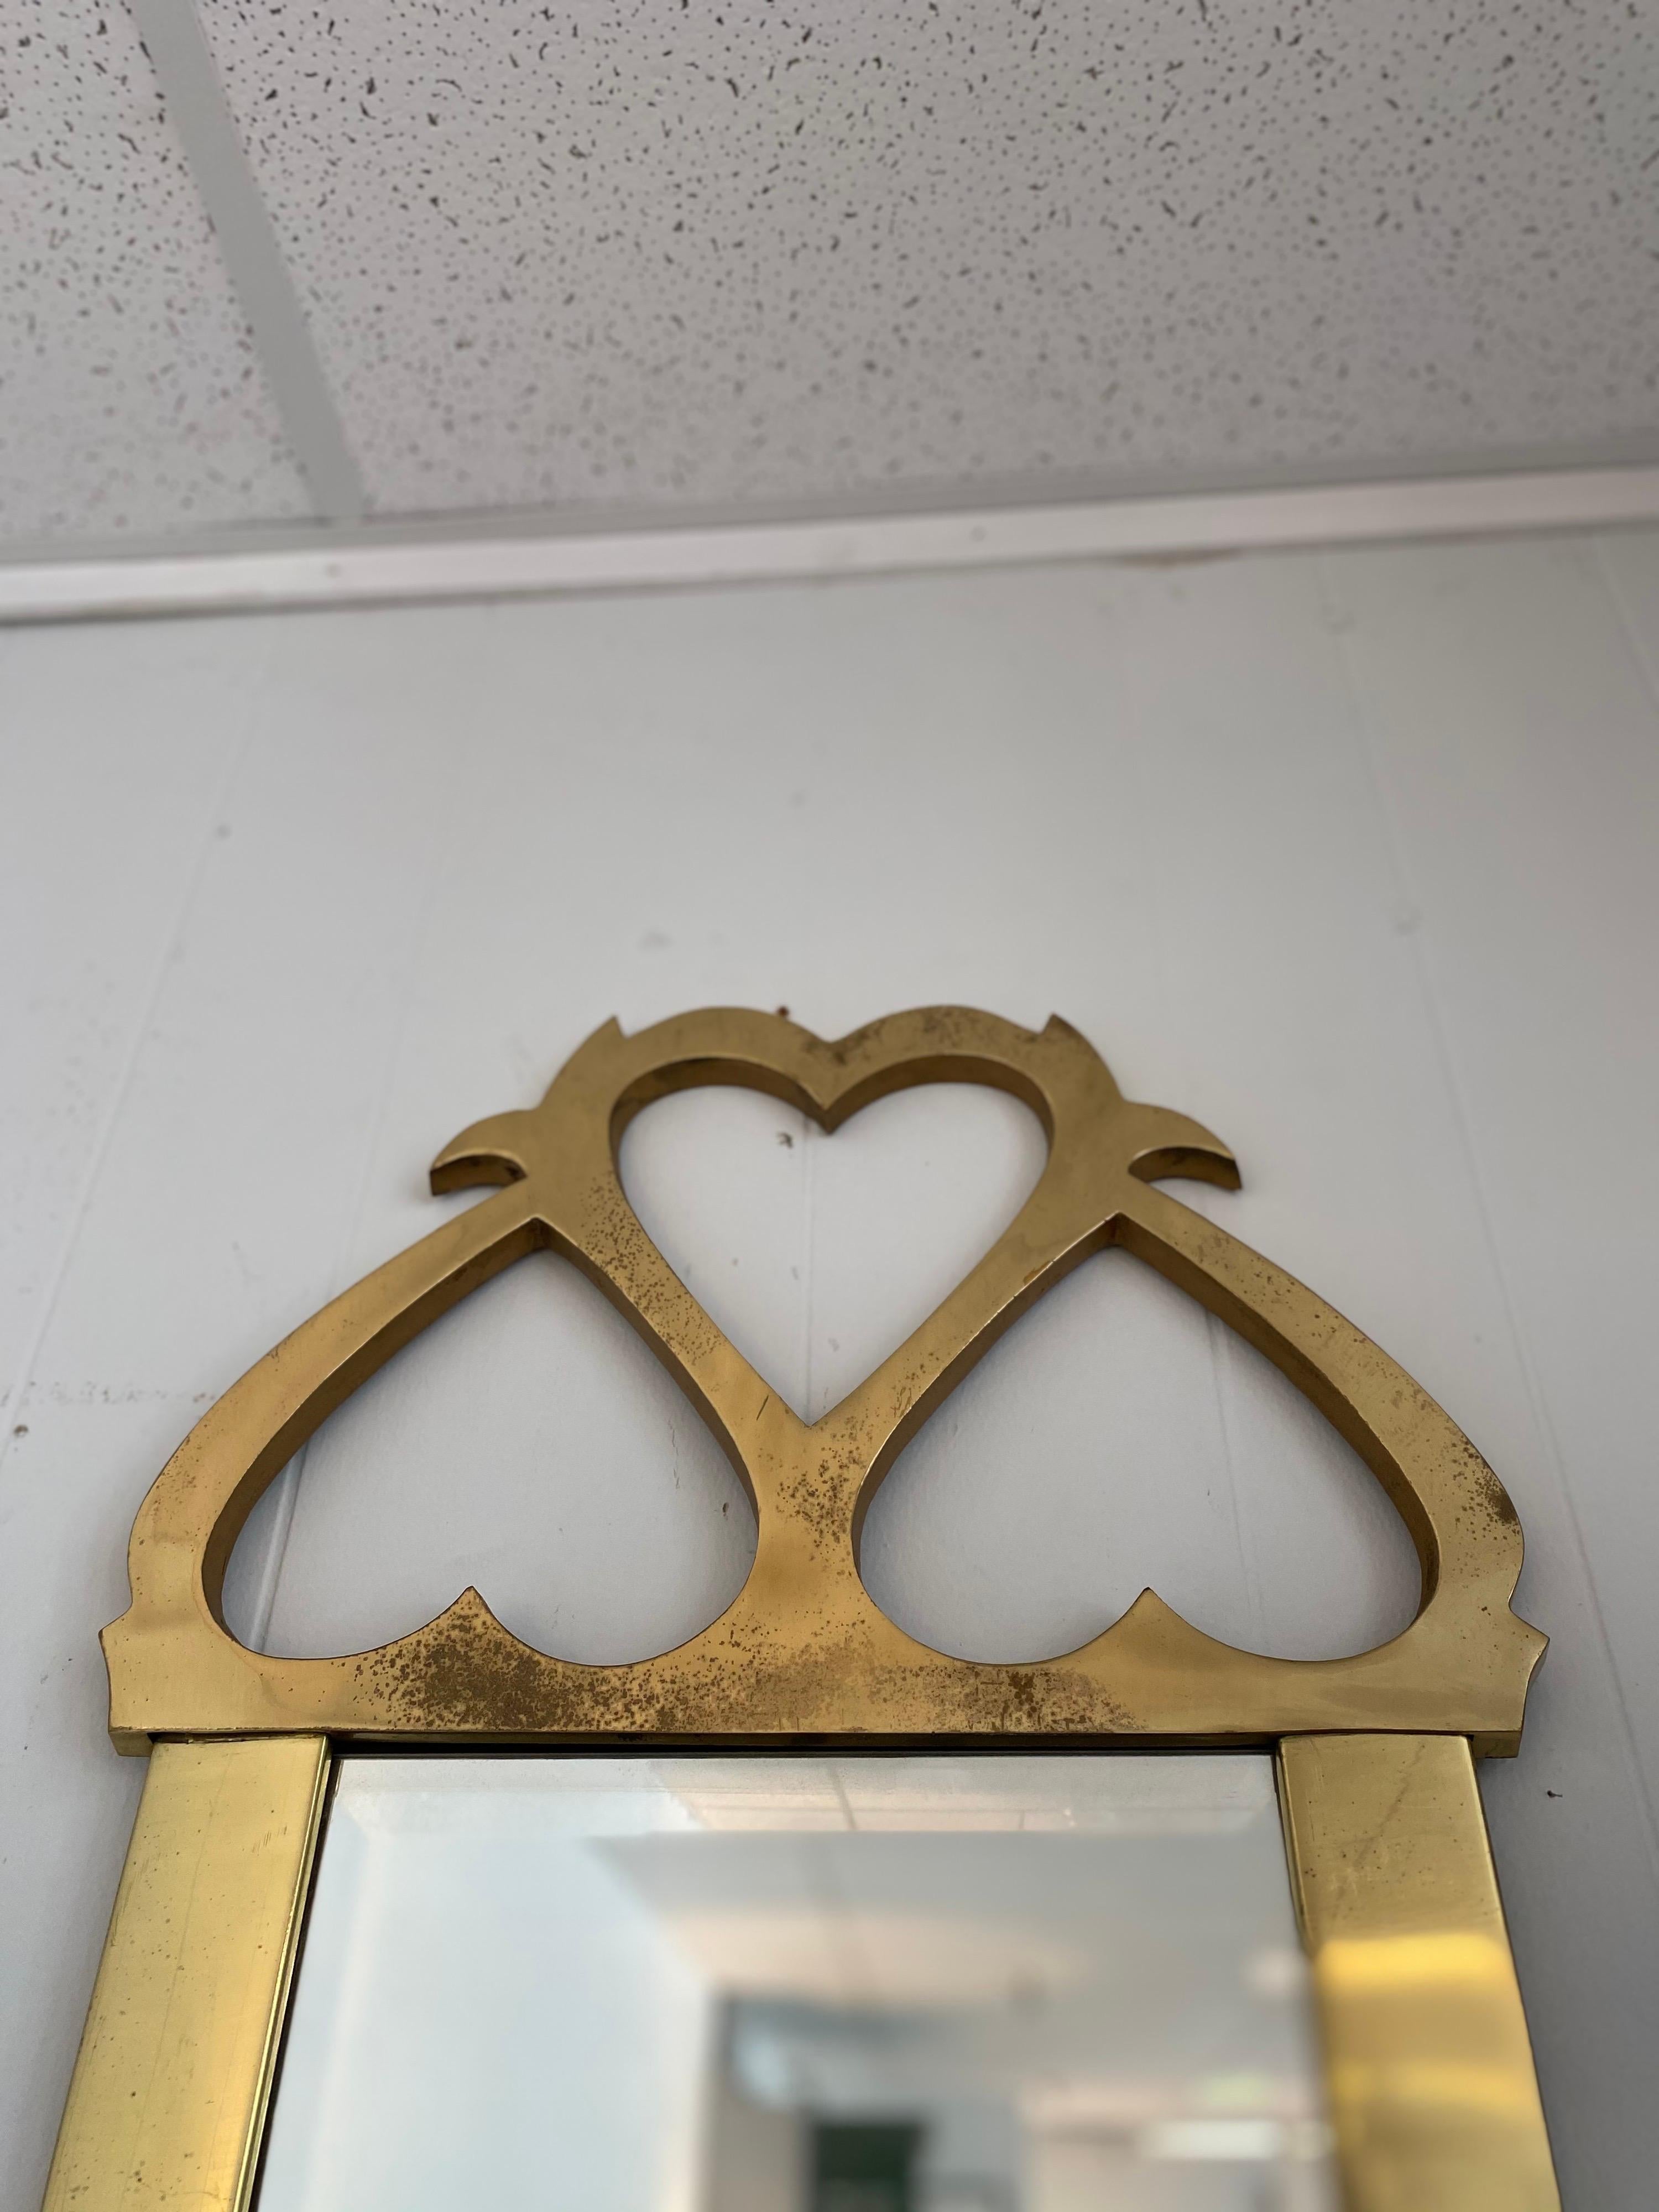 Vintage brass hanging mirror for Mastercraft has some patina but is in overall good condition. 
Width shown below is the measurement for the widest point at the bottom of the mirror. The mid-area of the mirror measures 14.50 inches.